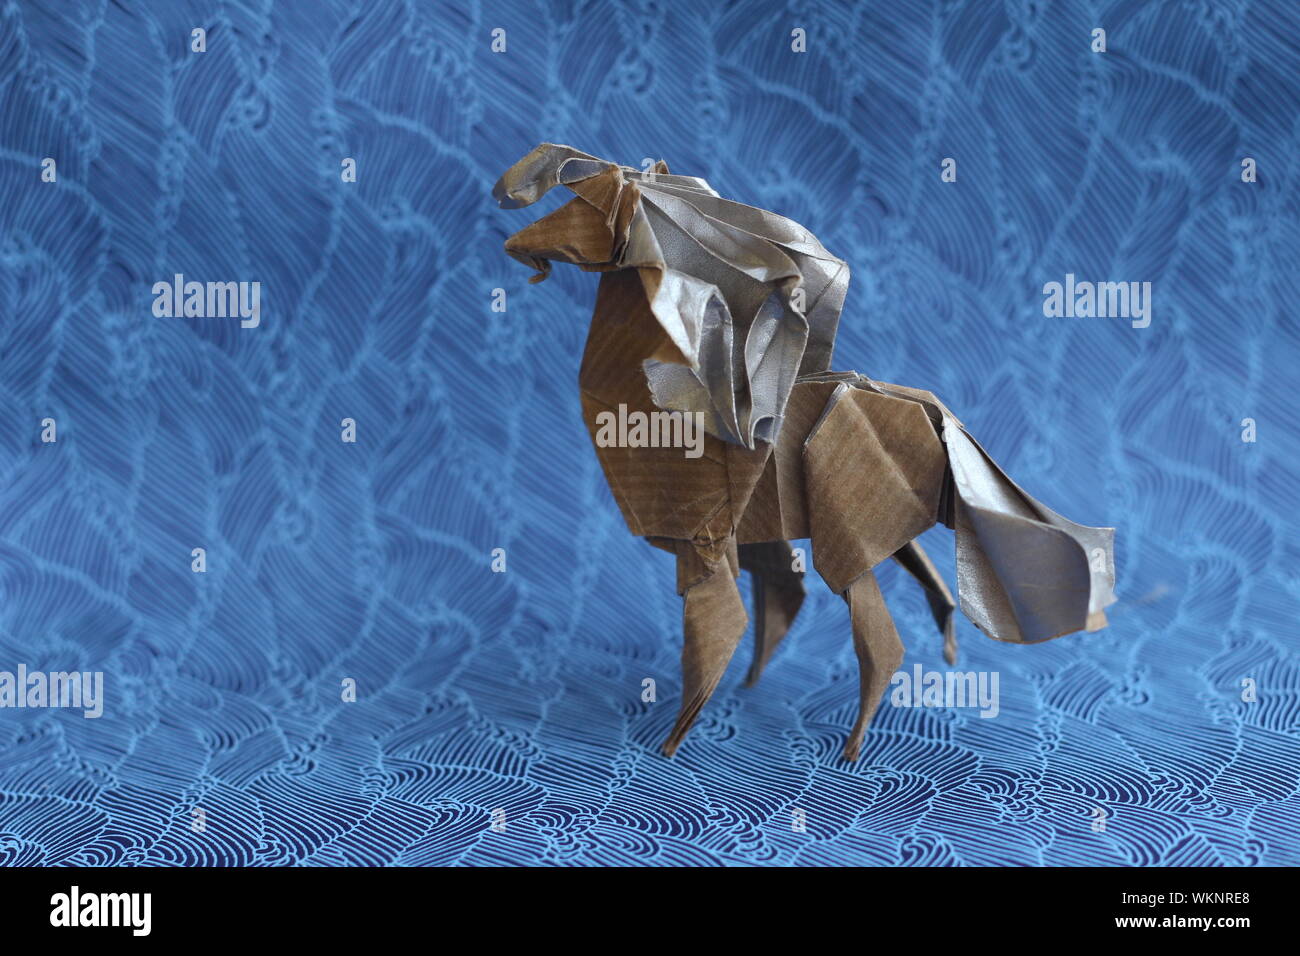 Close-up Of Paper Horse On Blue Backdrop Stock Photo